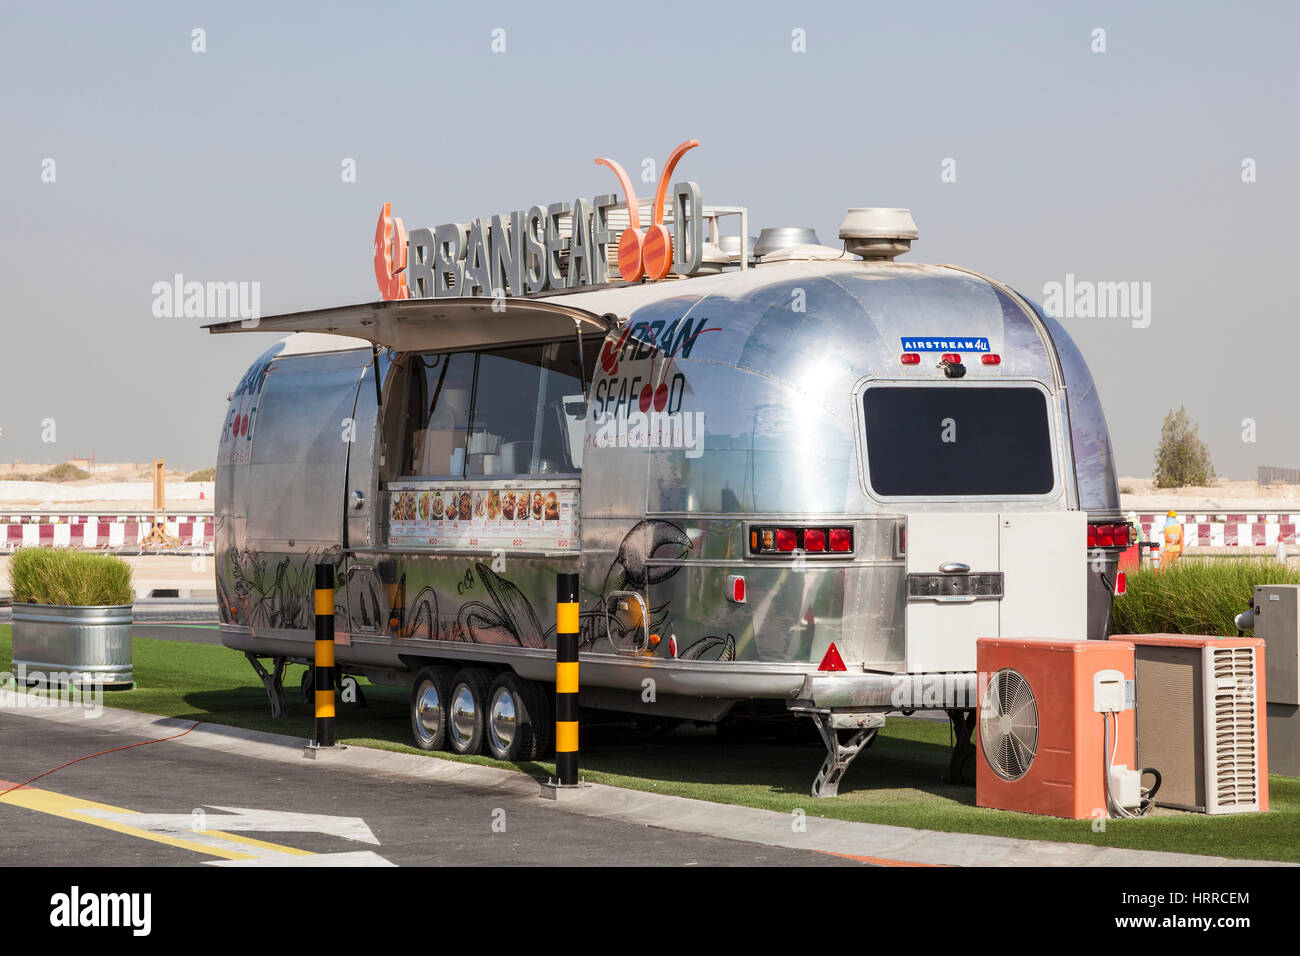 DUBAI, UAE - NOV 27, 2016: Airstream caravan converted to the Urgan Seafood truck at the Last Exit food trucks park on the E11 highway between Abu Dha Stock Photo